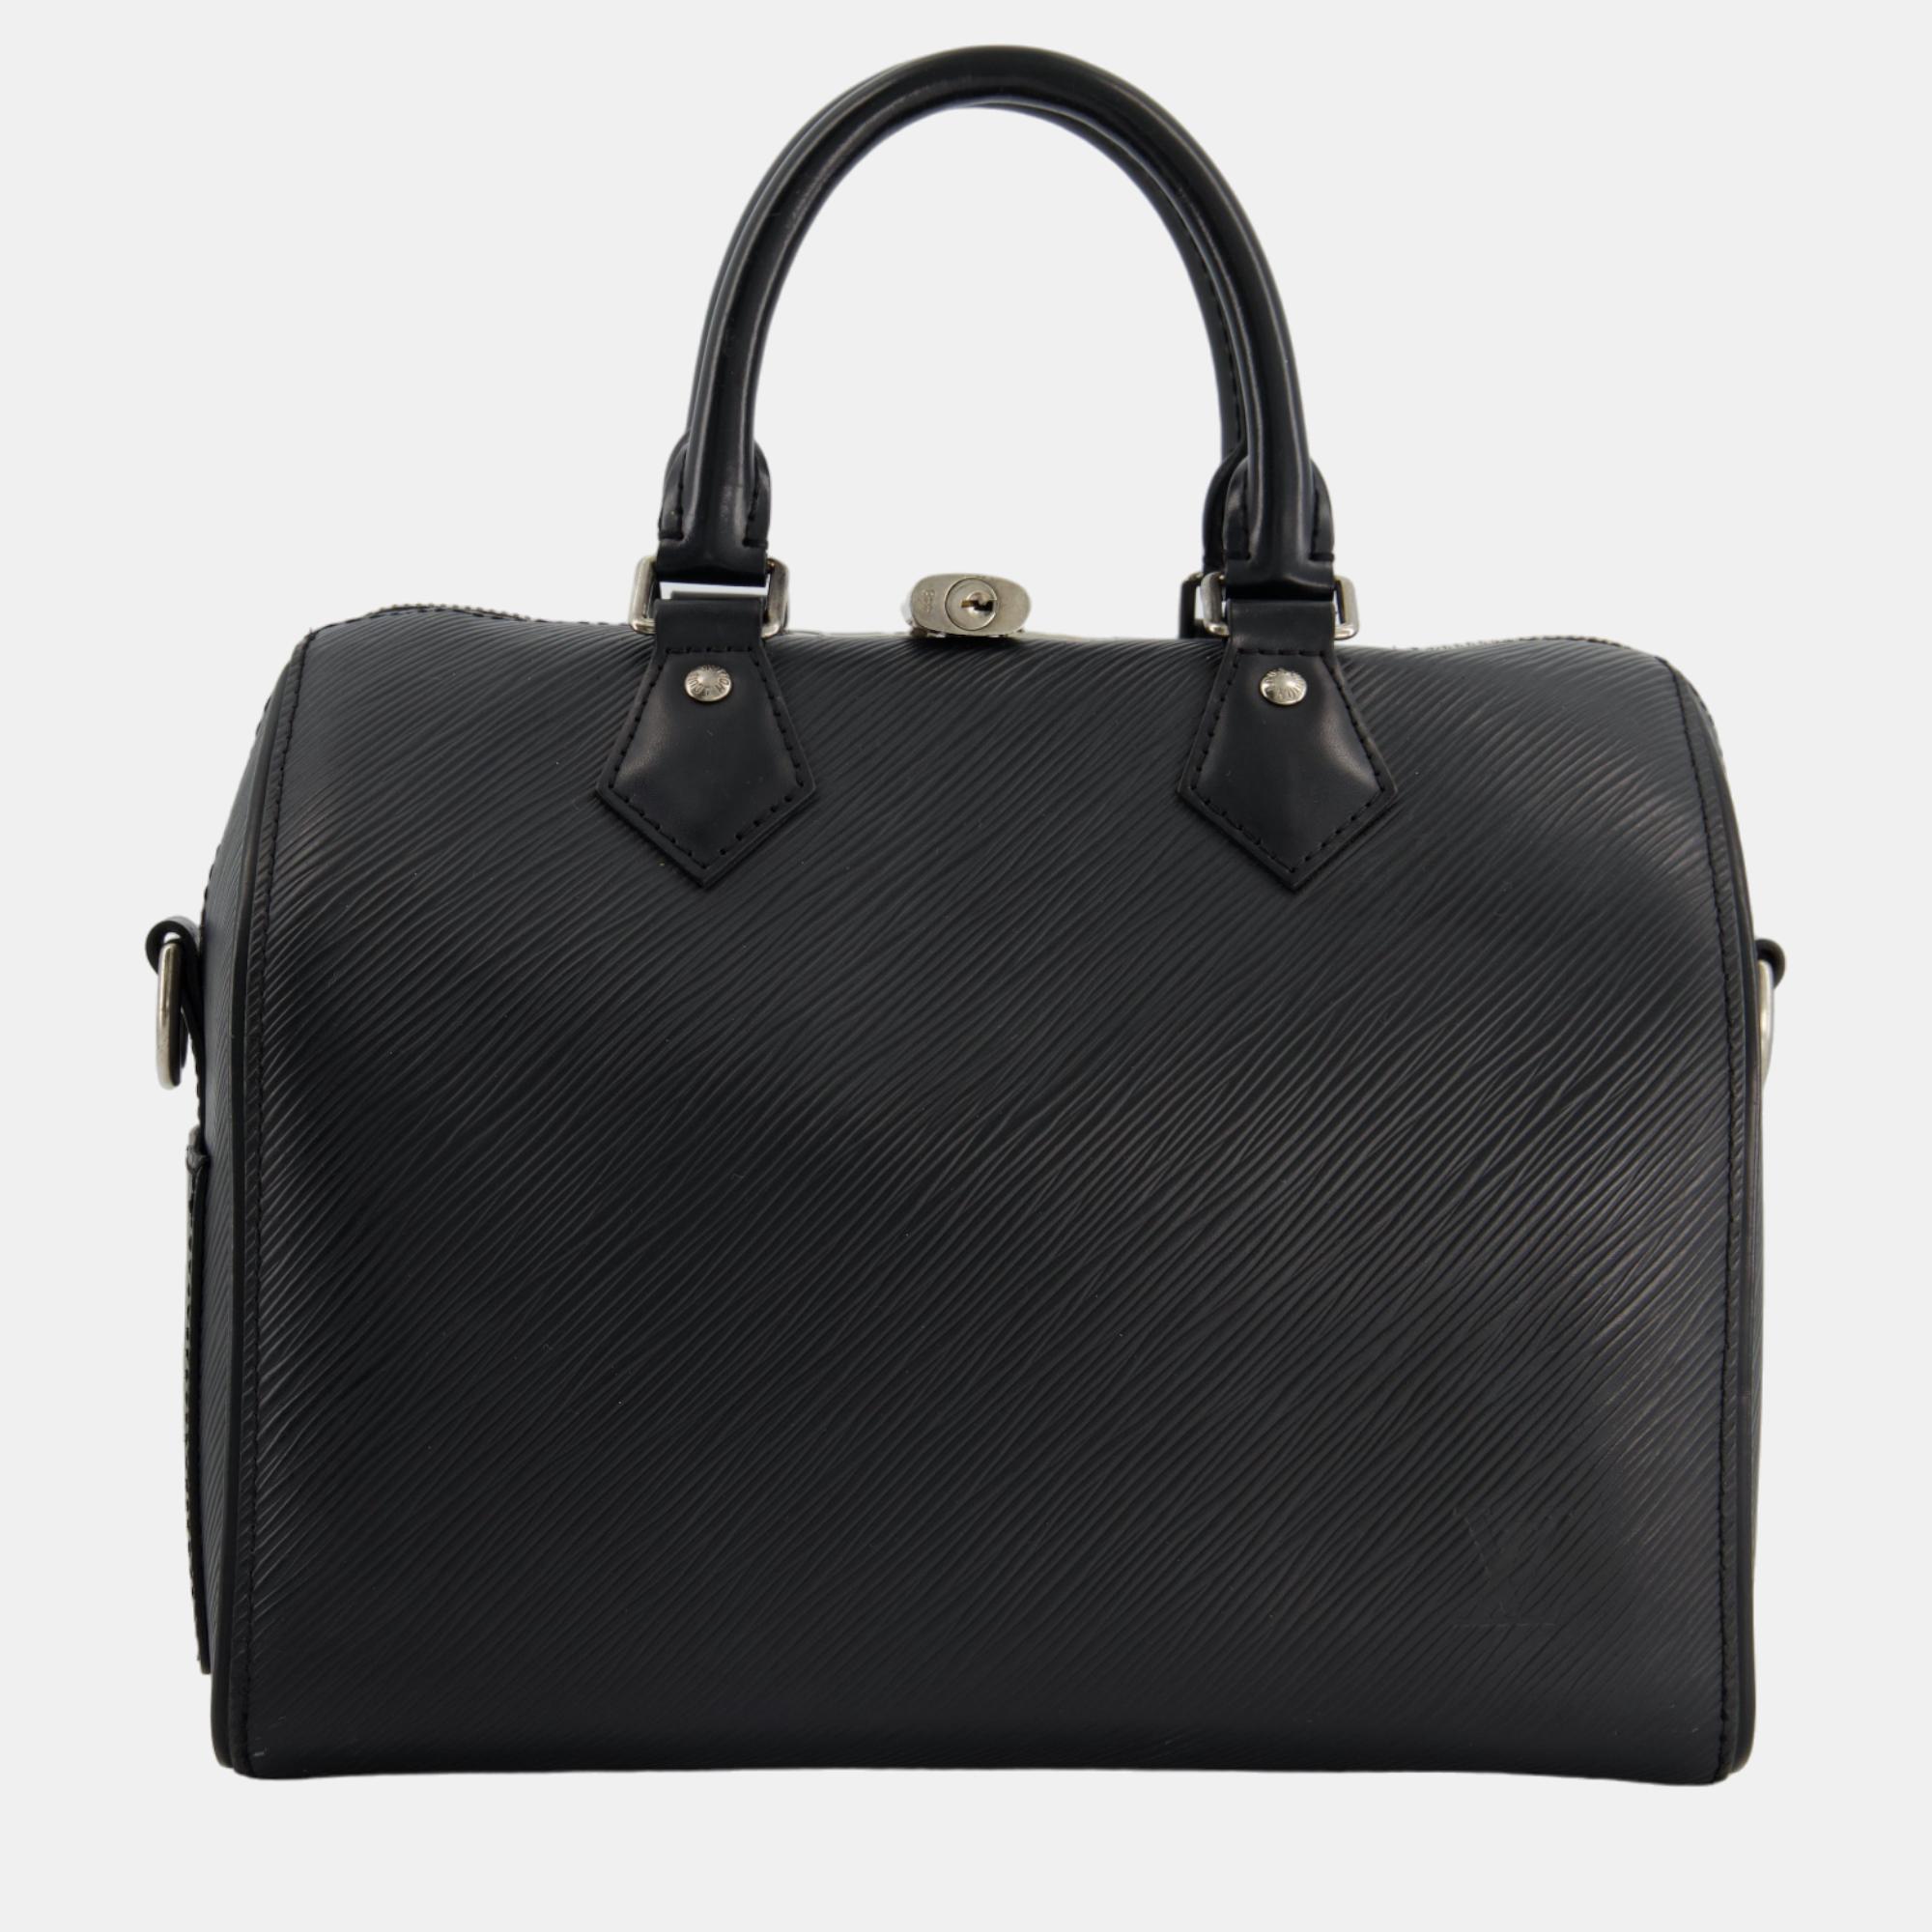 Louis vuitton black 25 speedy bag bandouliere in epi leather and silver hardware